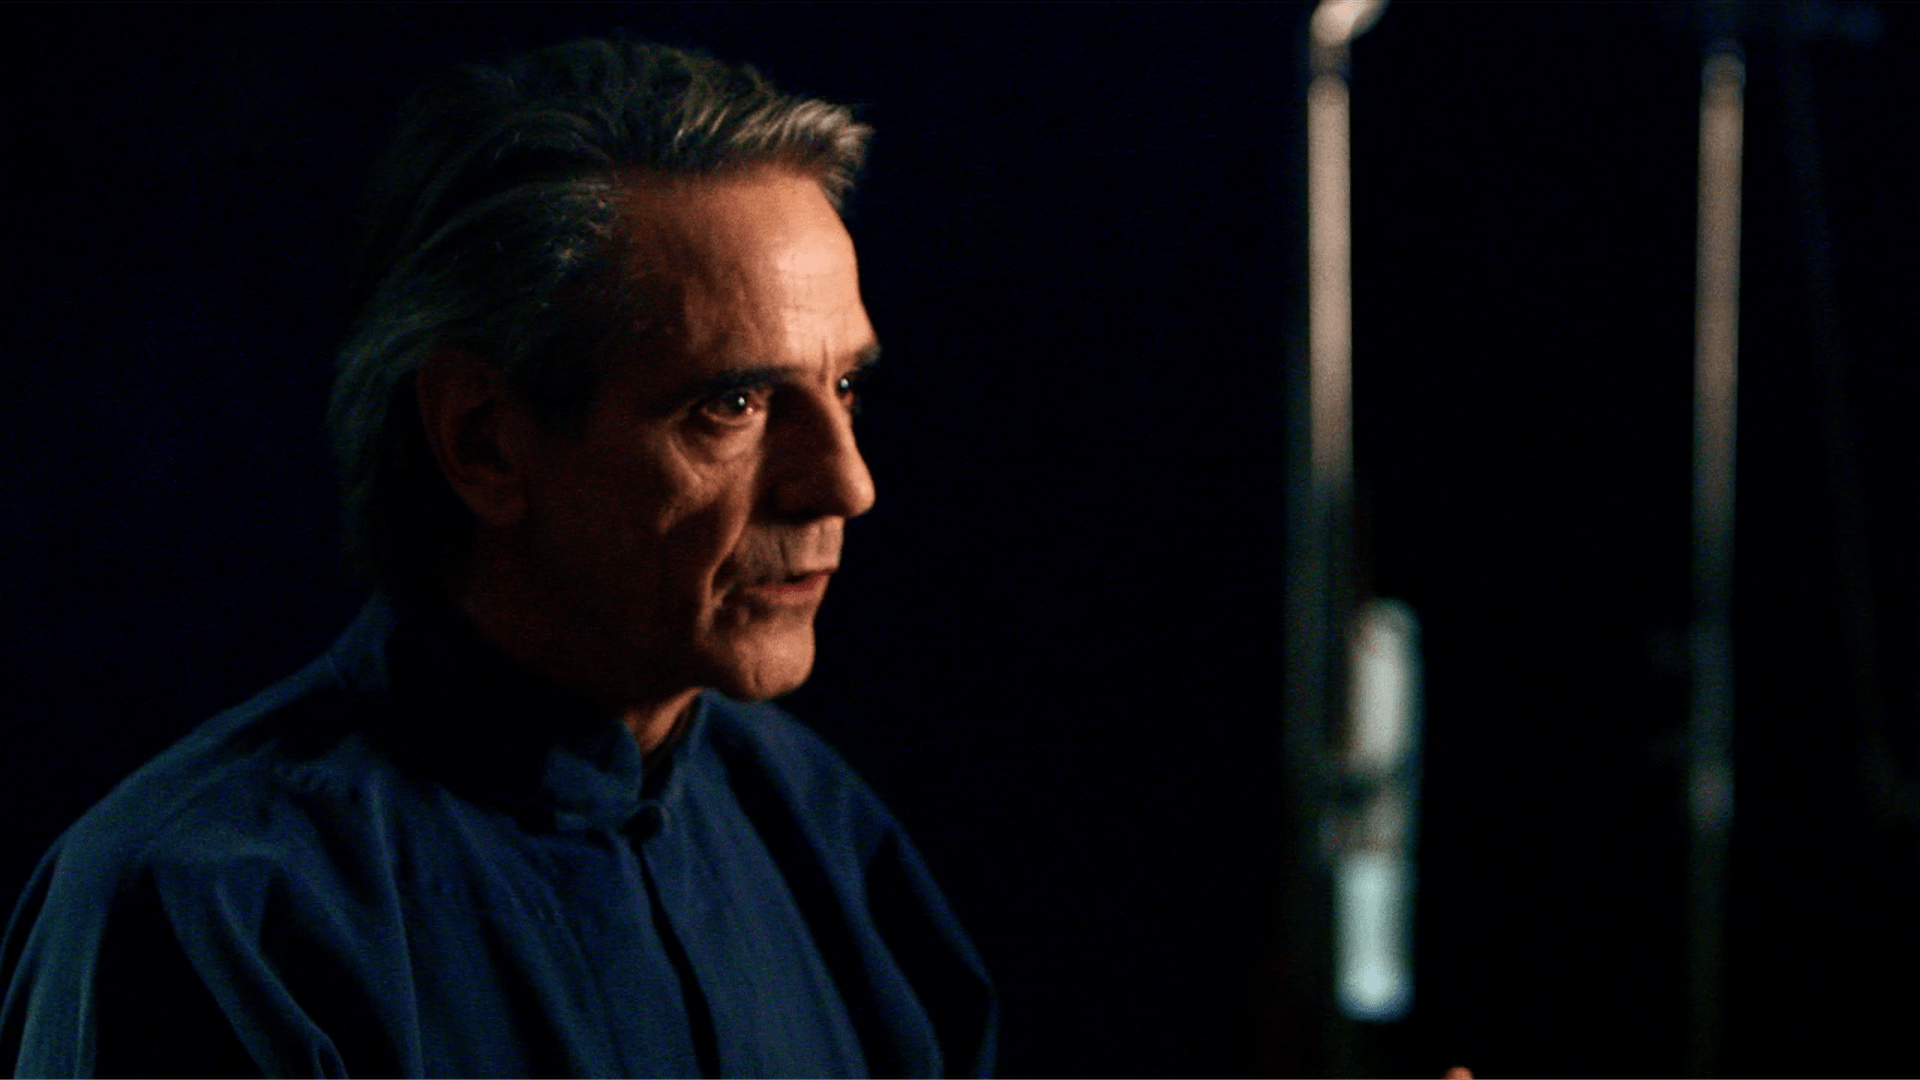 Jeremy Irons on Shakespeare Uncovered. Season 1 Episode 4